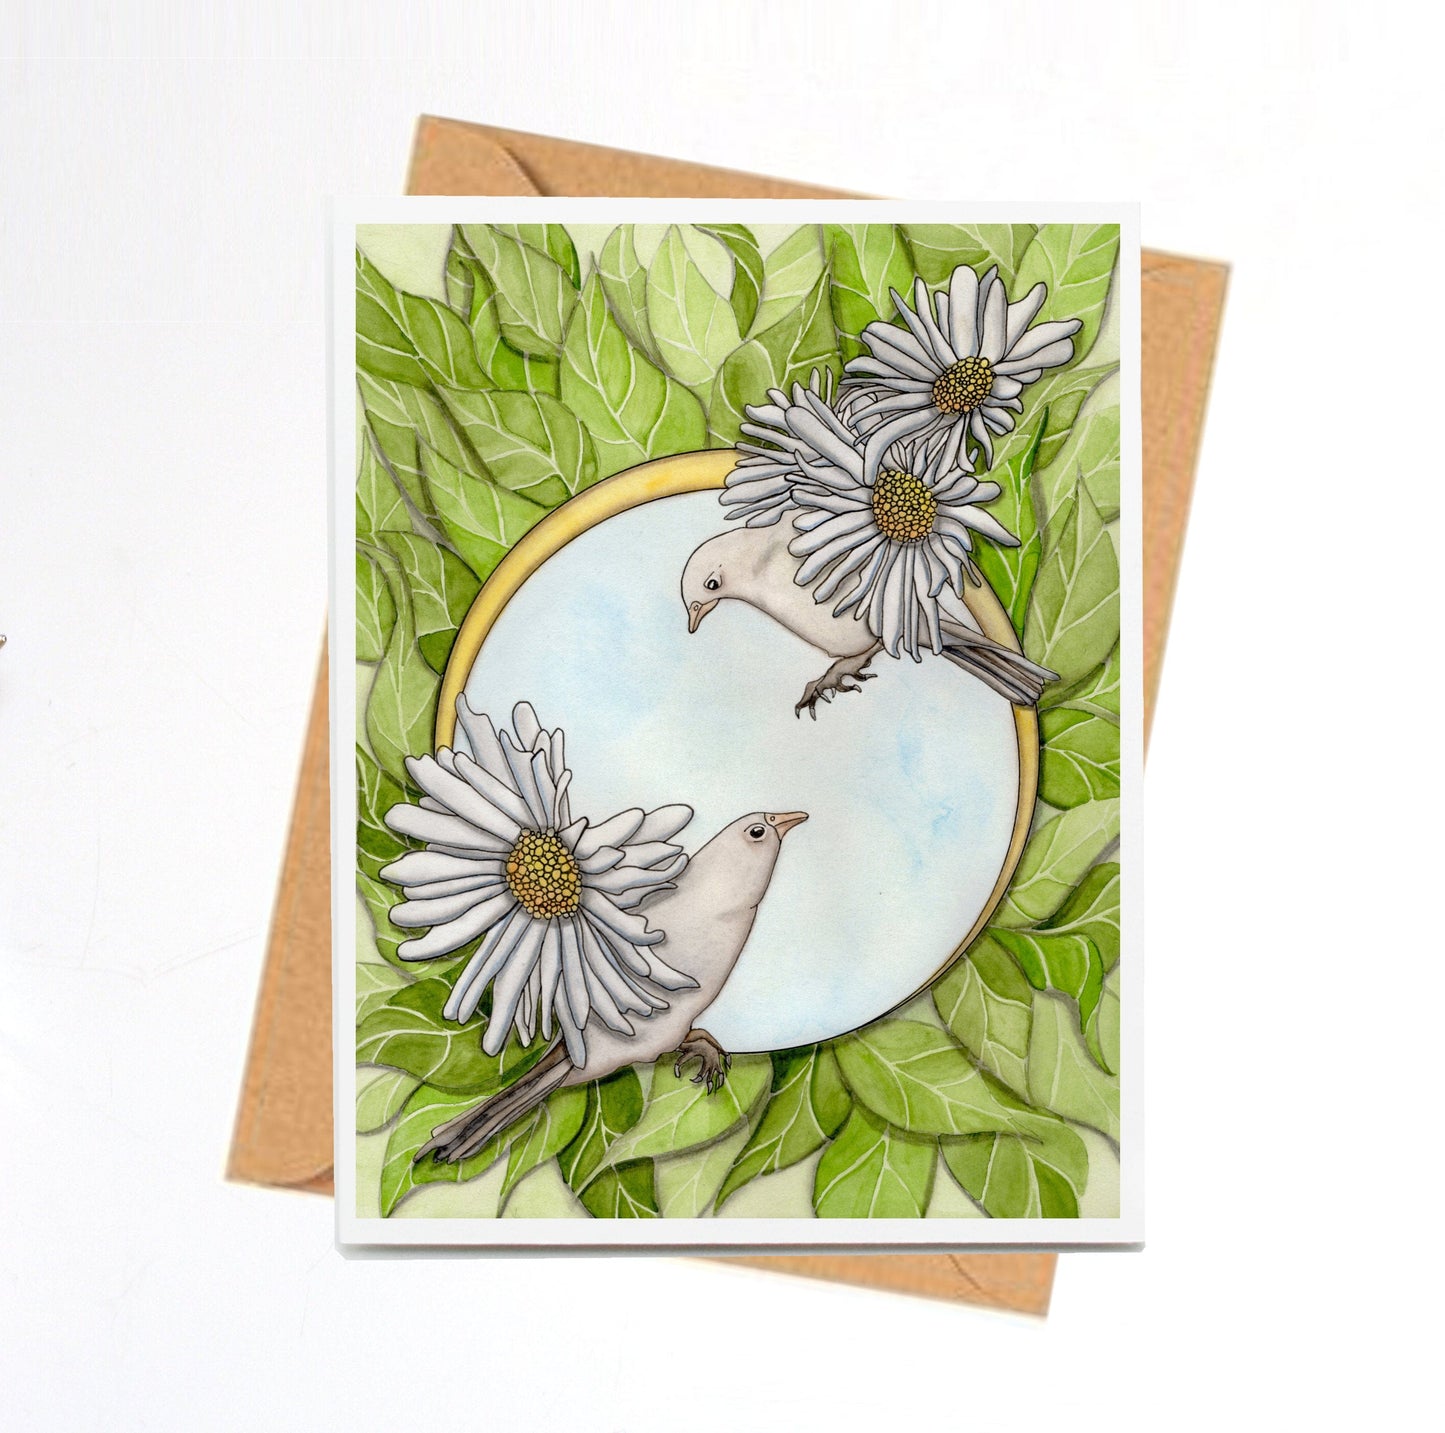 PinkPolish Design Note Cards "Daisy Finches" Handmade Note Card